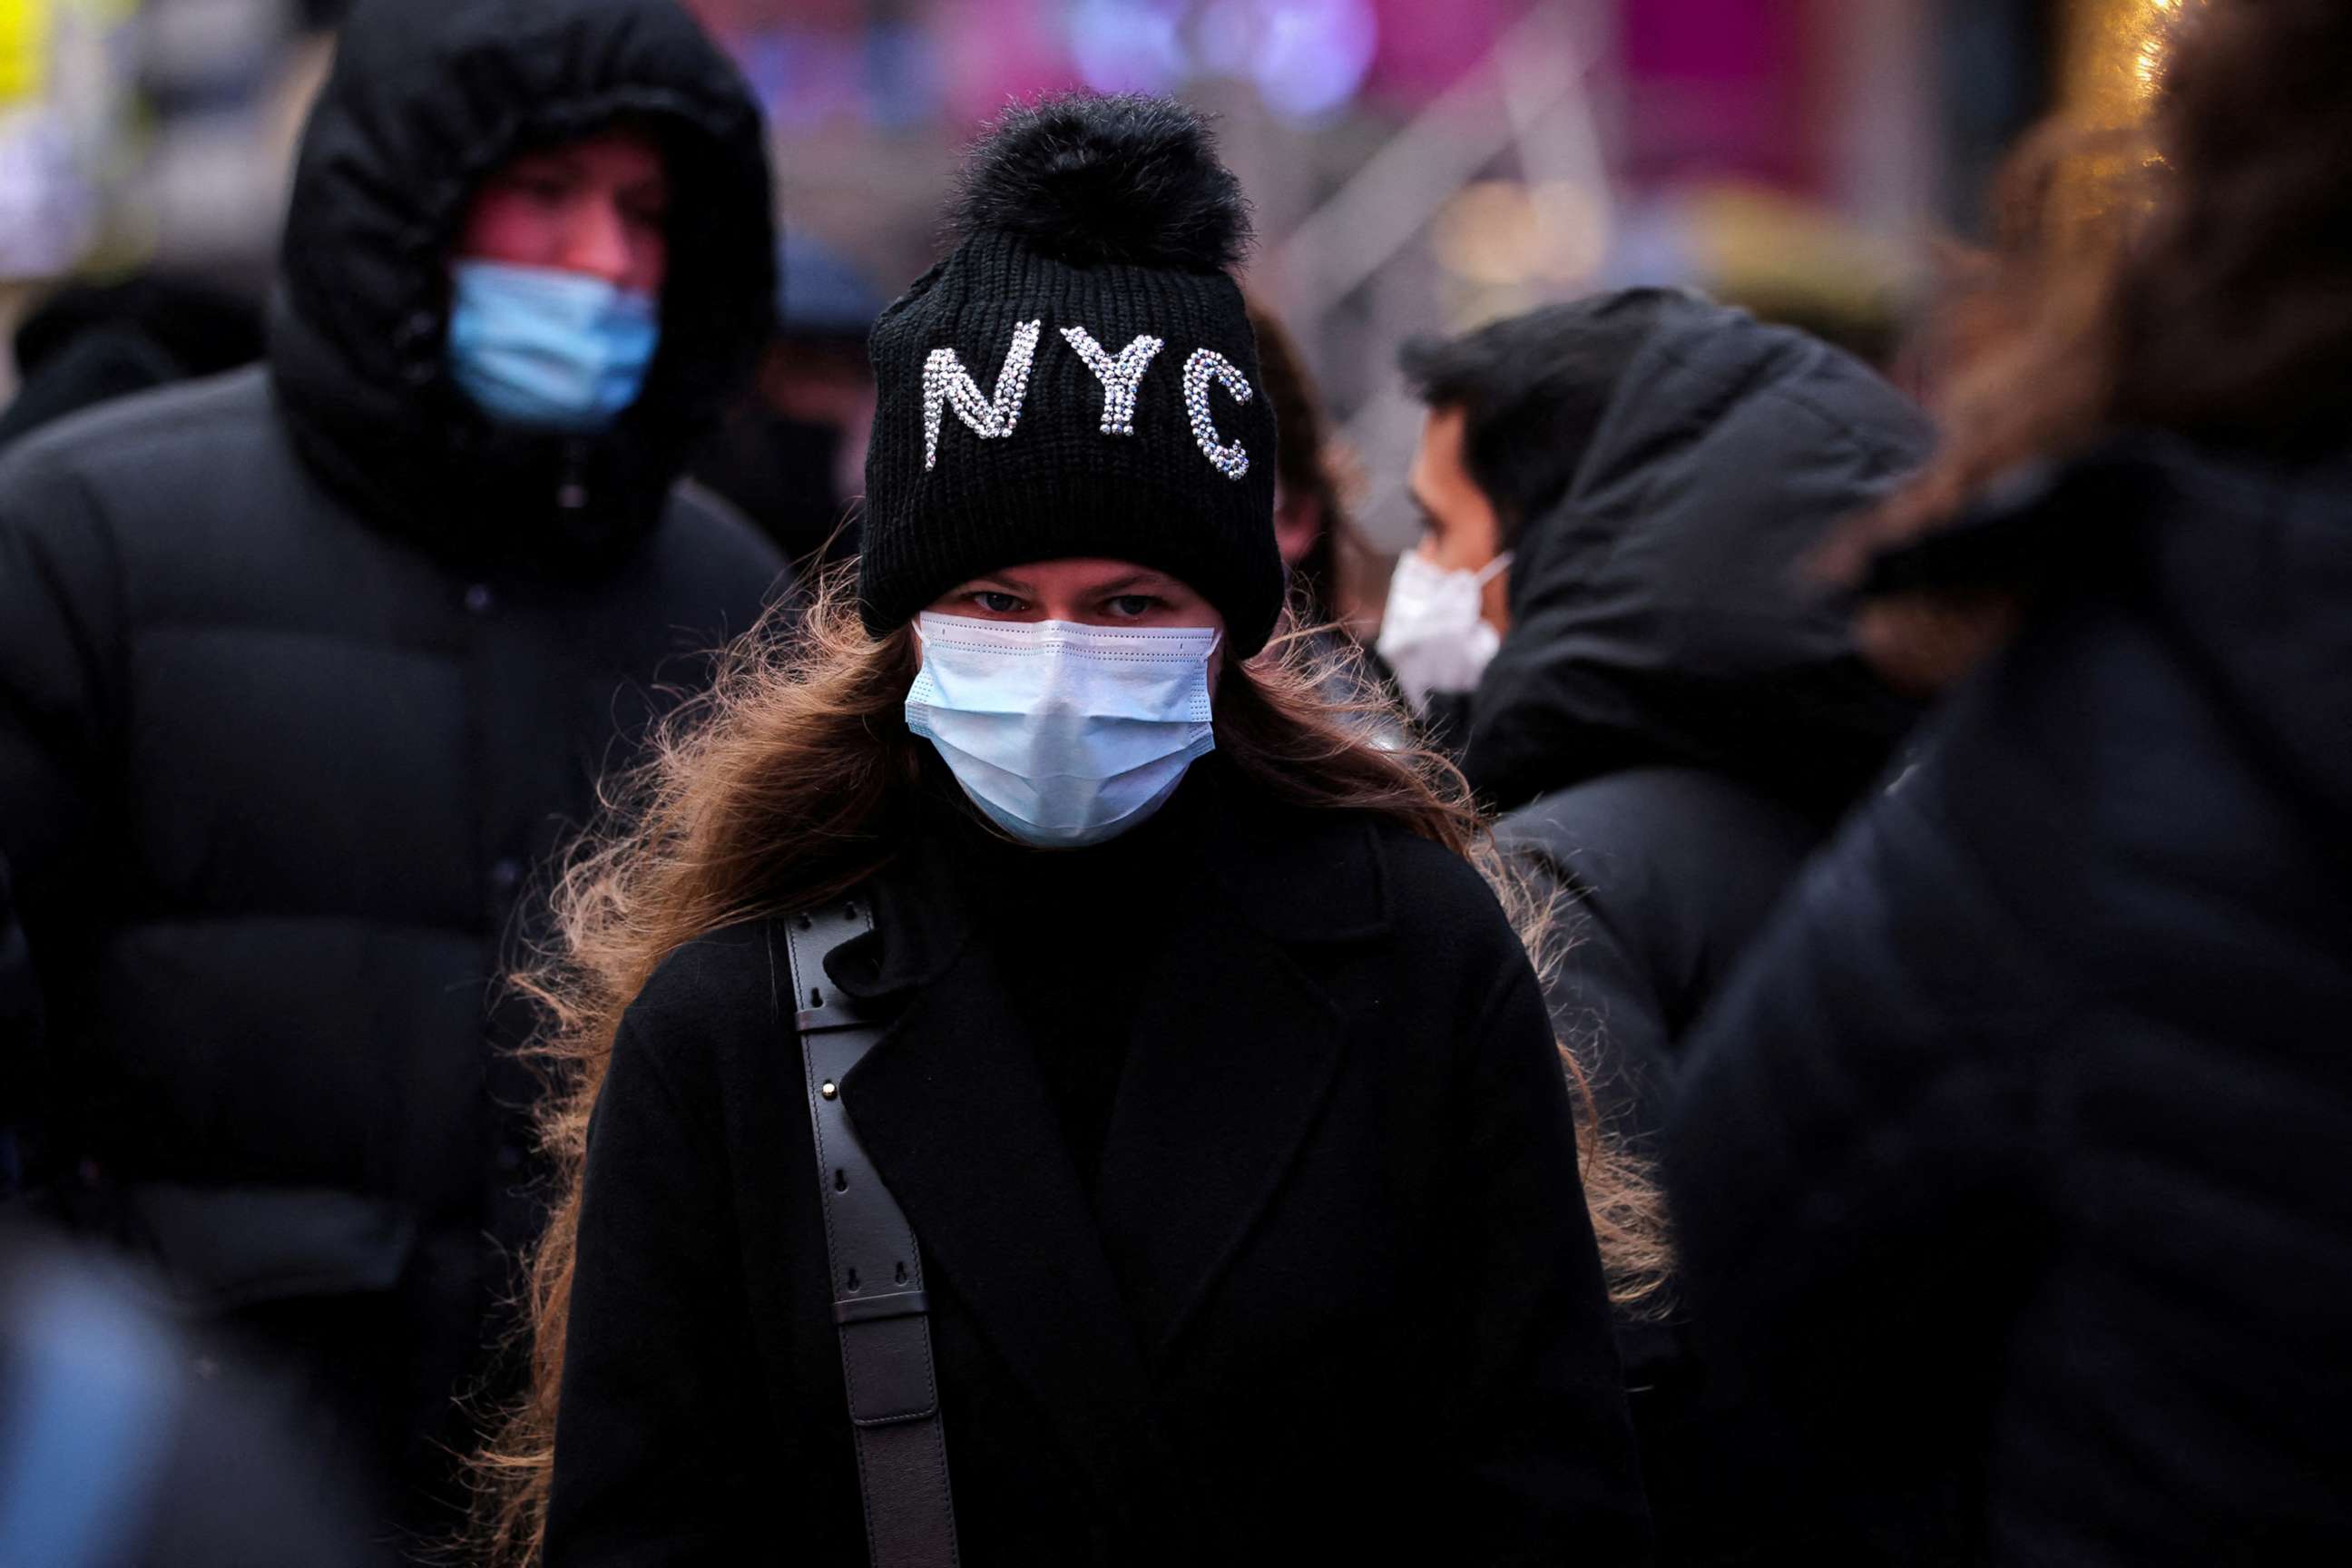 PHOTO: A person waits in a queue for a COVID-19 test in Times Square during cold weather in New York City, Dec. 19, 2021.